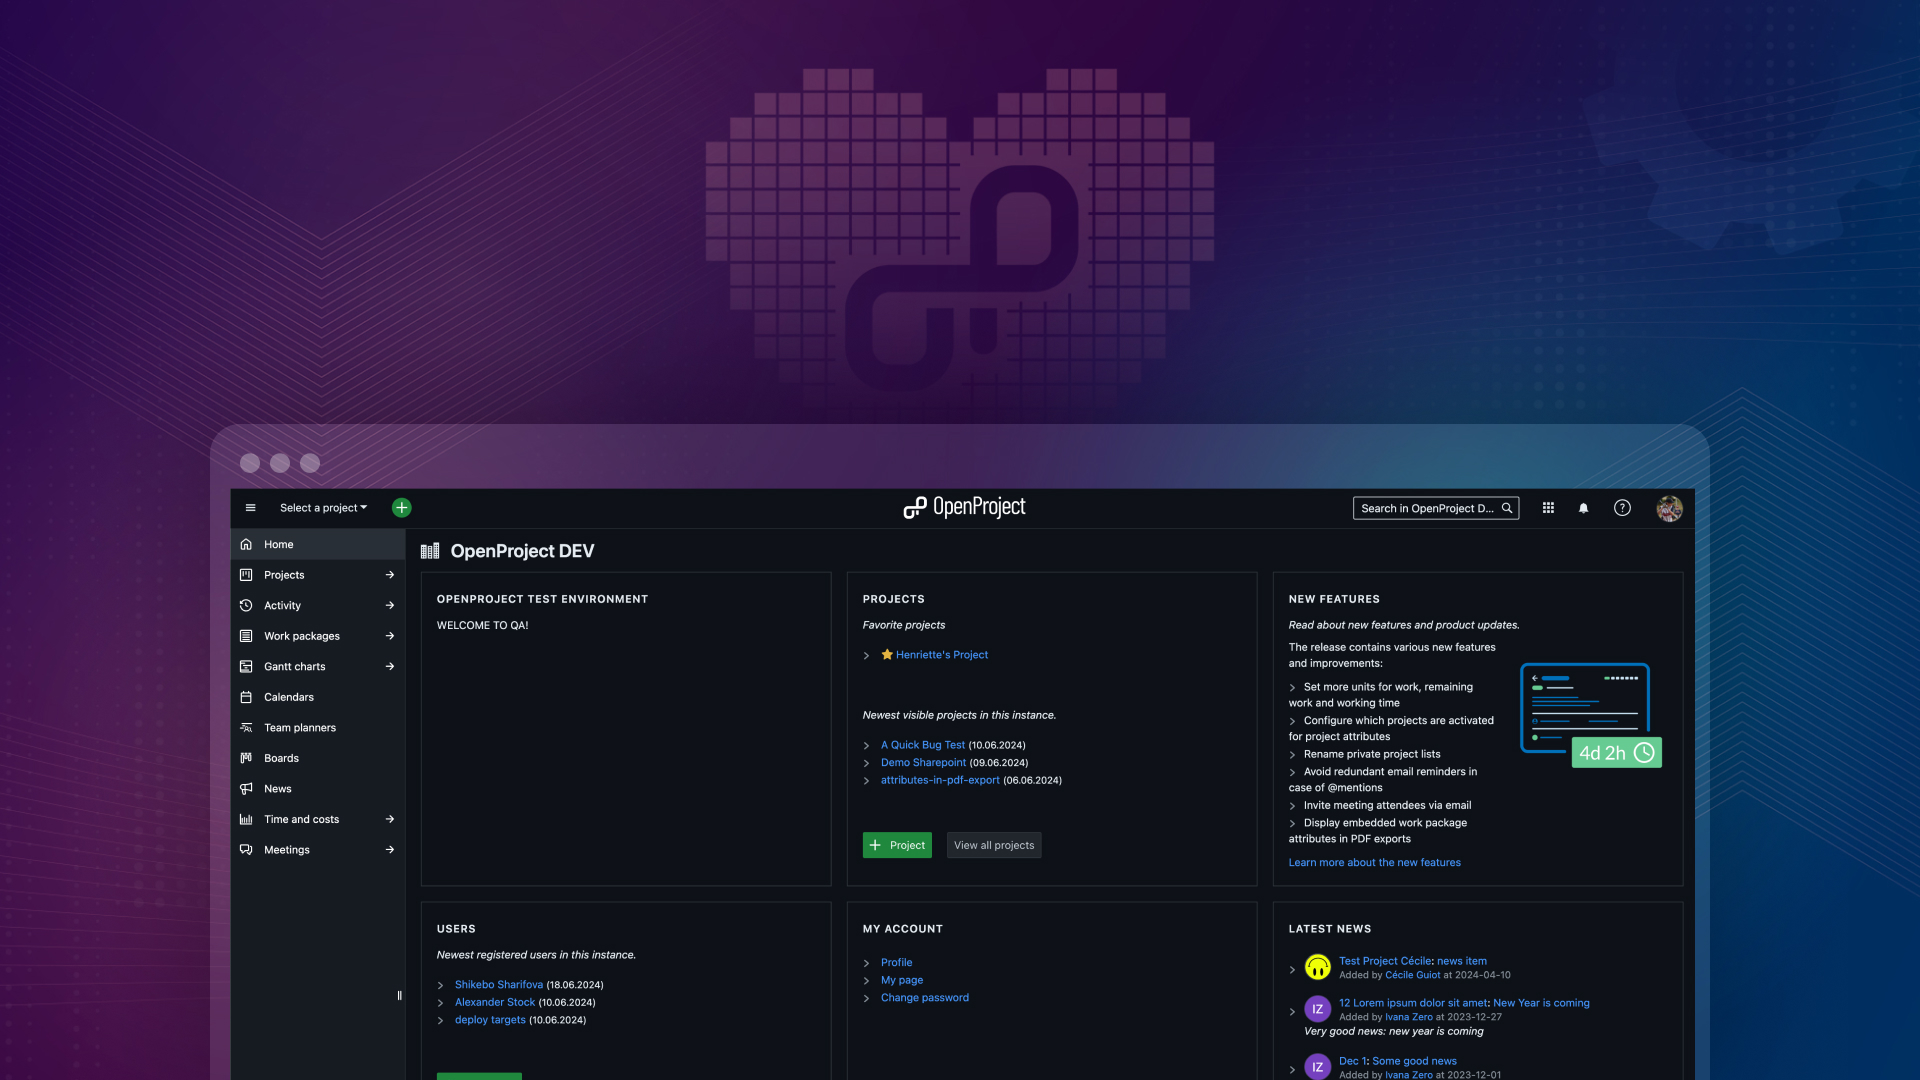 OpenProject Home page displayed in dark mode